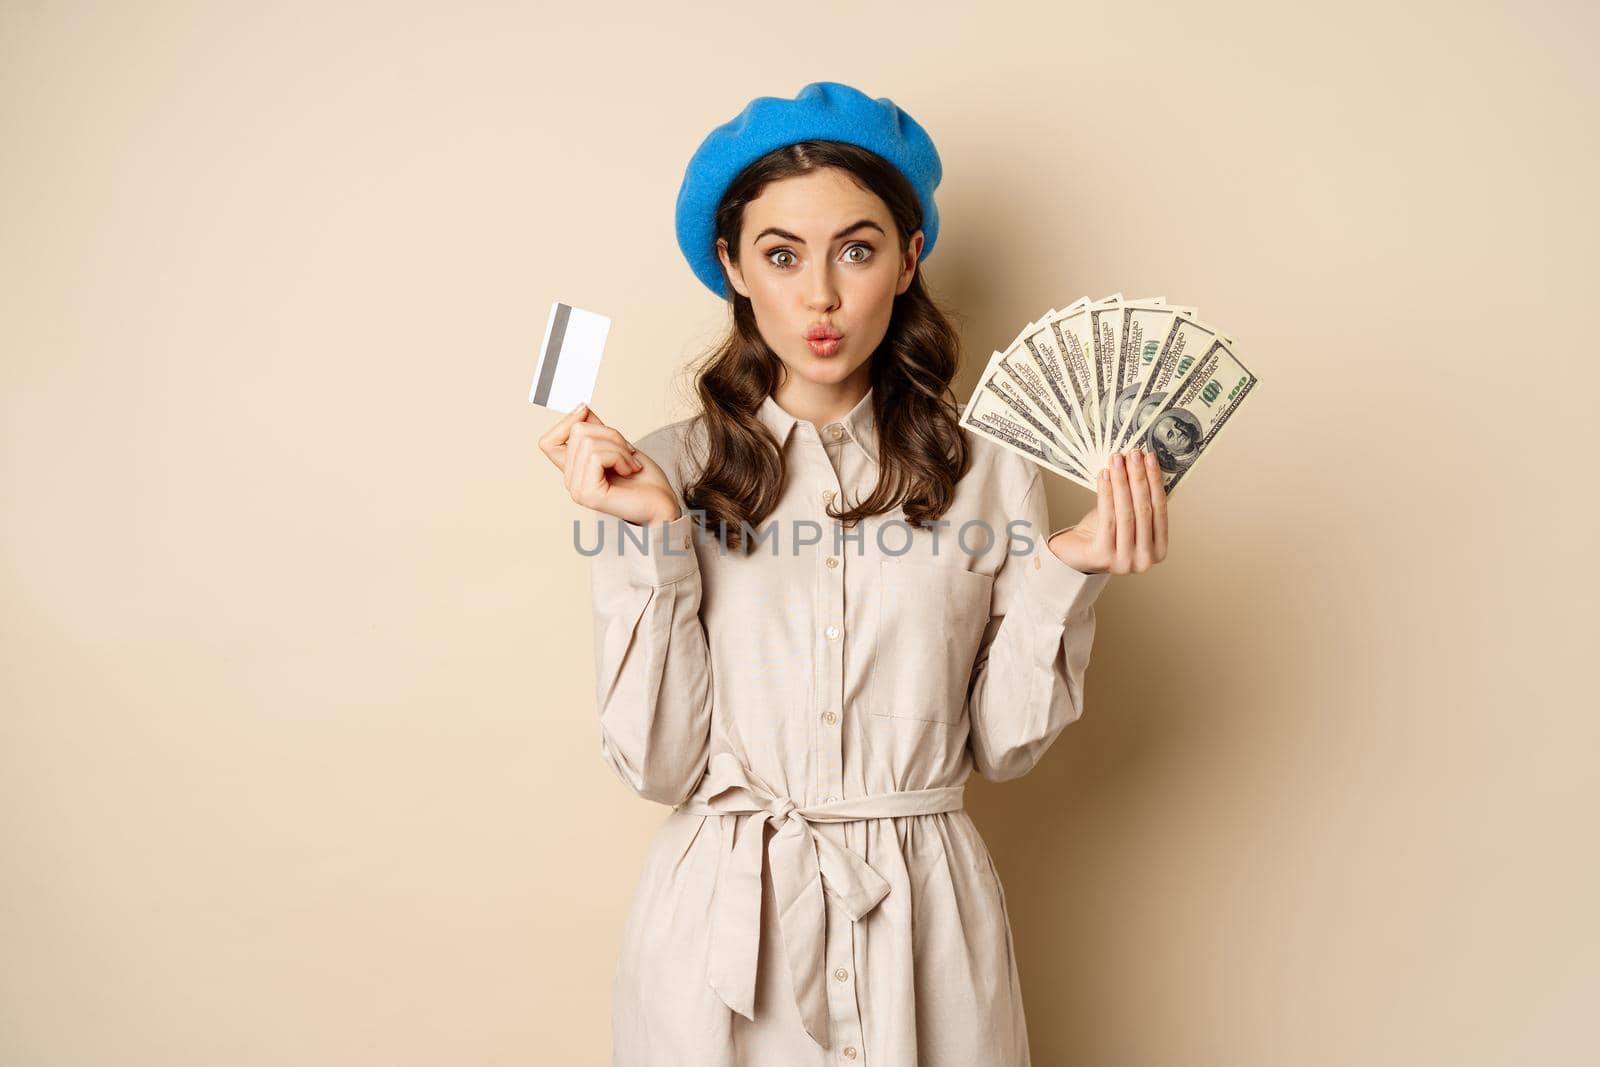 Microcredit and money concept. Young stylish woman showing credit card and dollars cash, smiling happy and satisfied, standing over beige background.